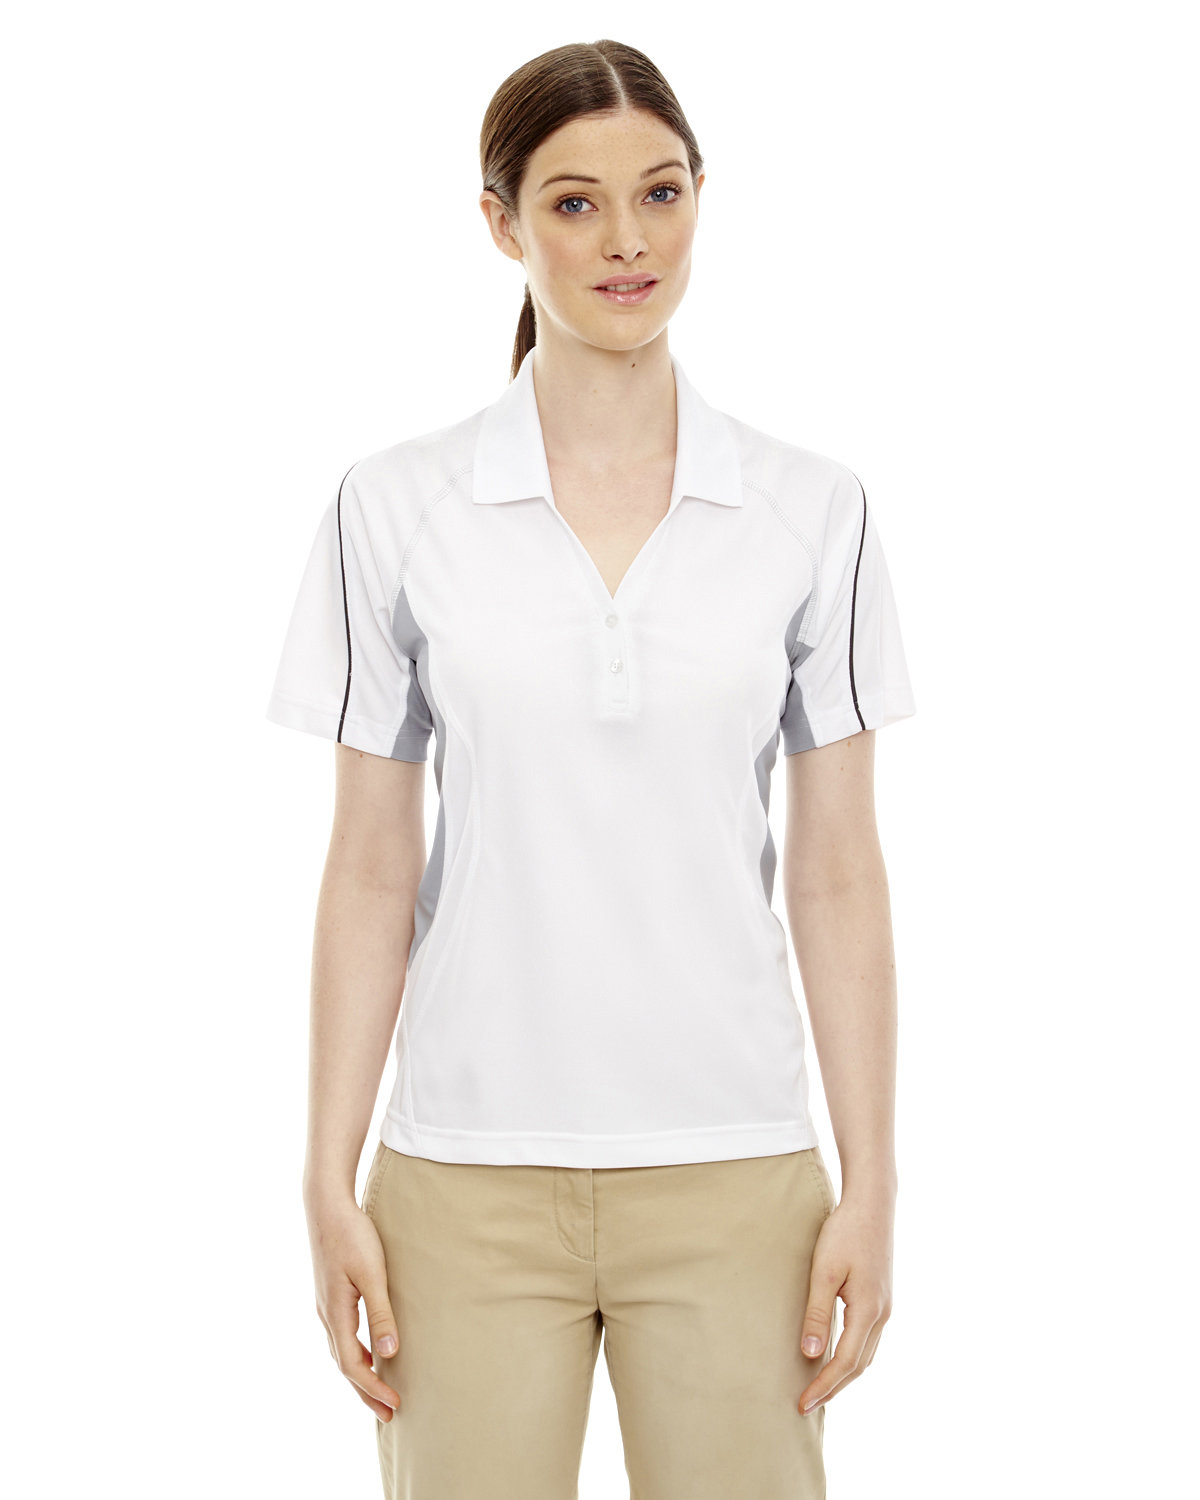 Extreme Ladies' Eperformance™ Parallel Snag Protection Polo with Piping WHITE 